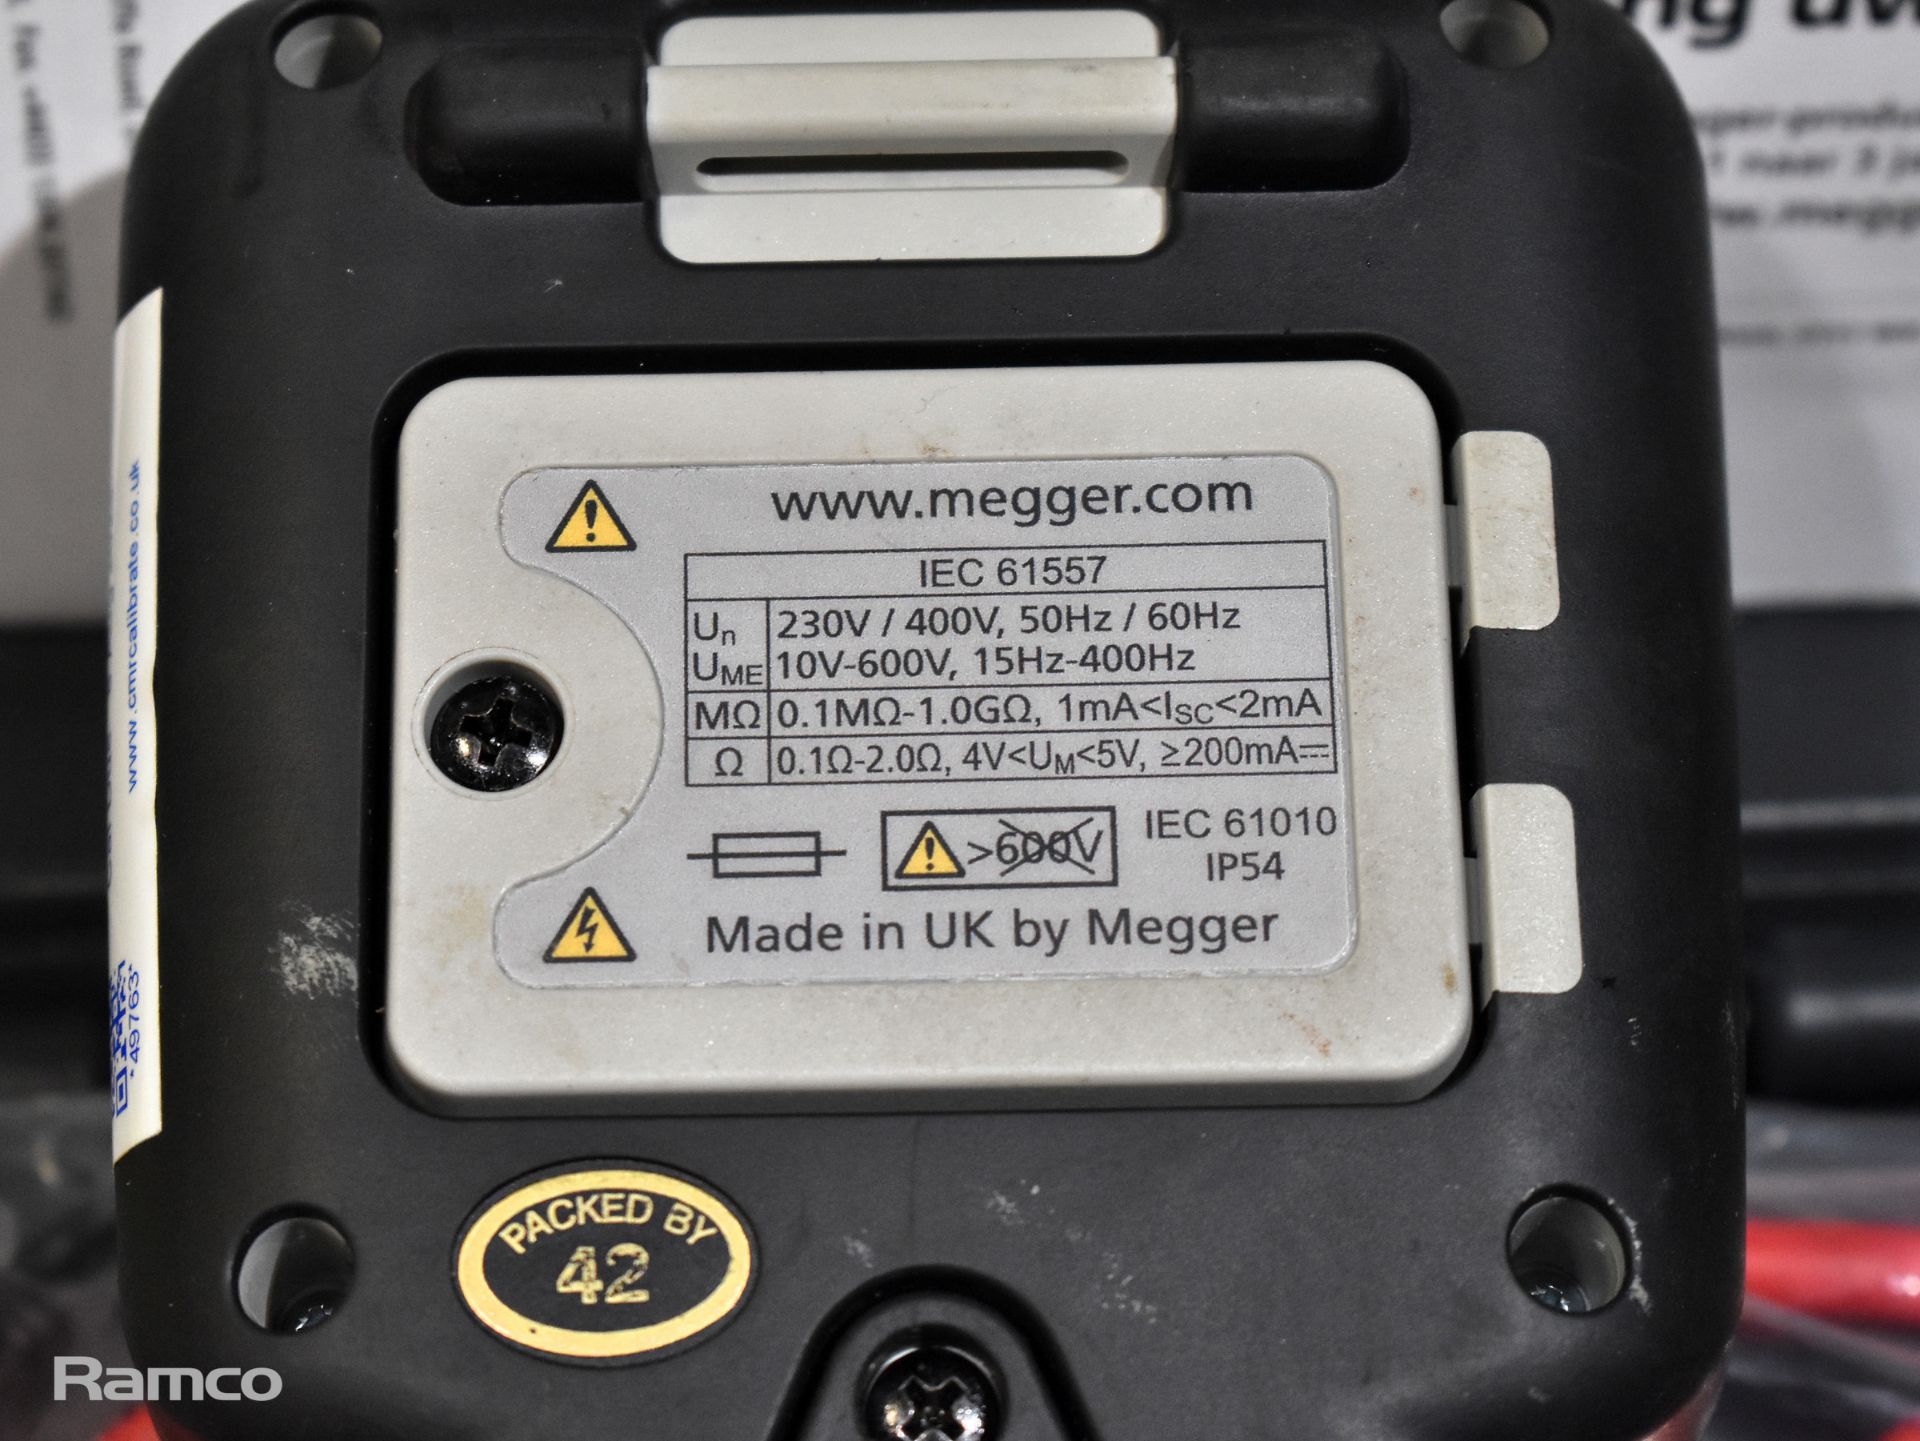 Megger MIT420/2 Cat IV insulation resistance tester with cables and storage case - Image 3 of 4